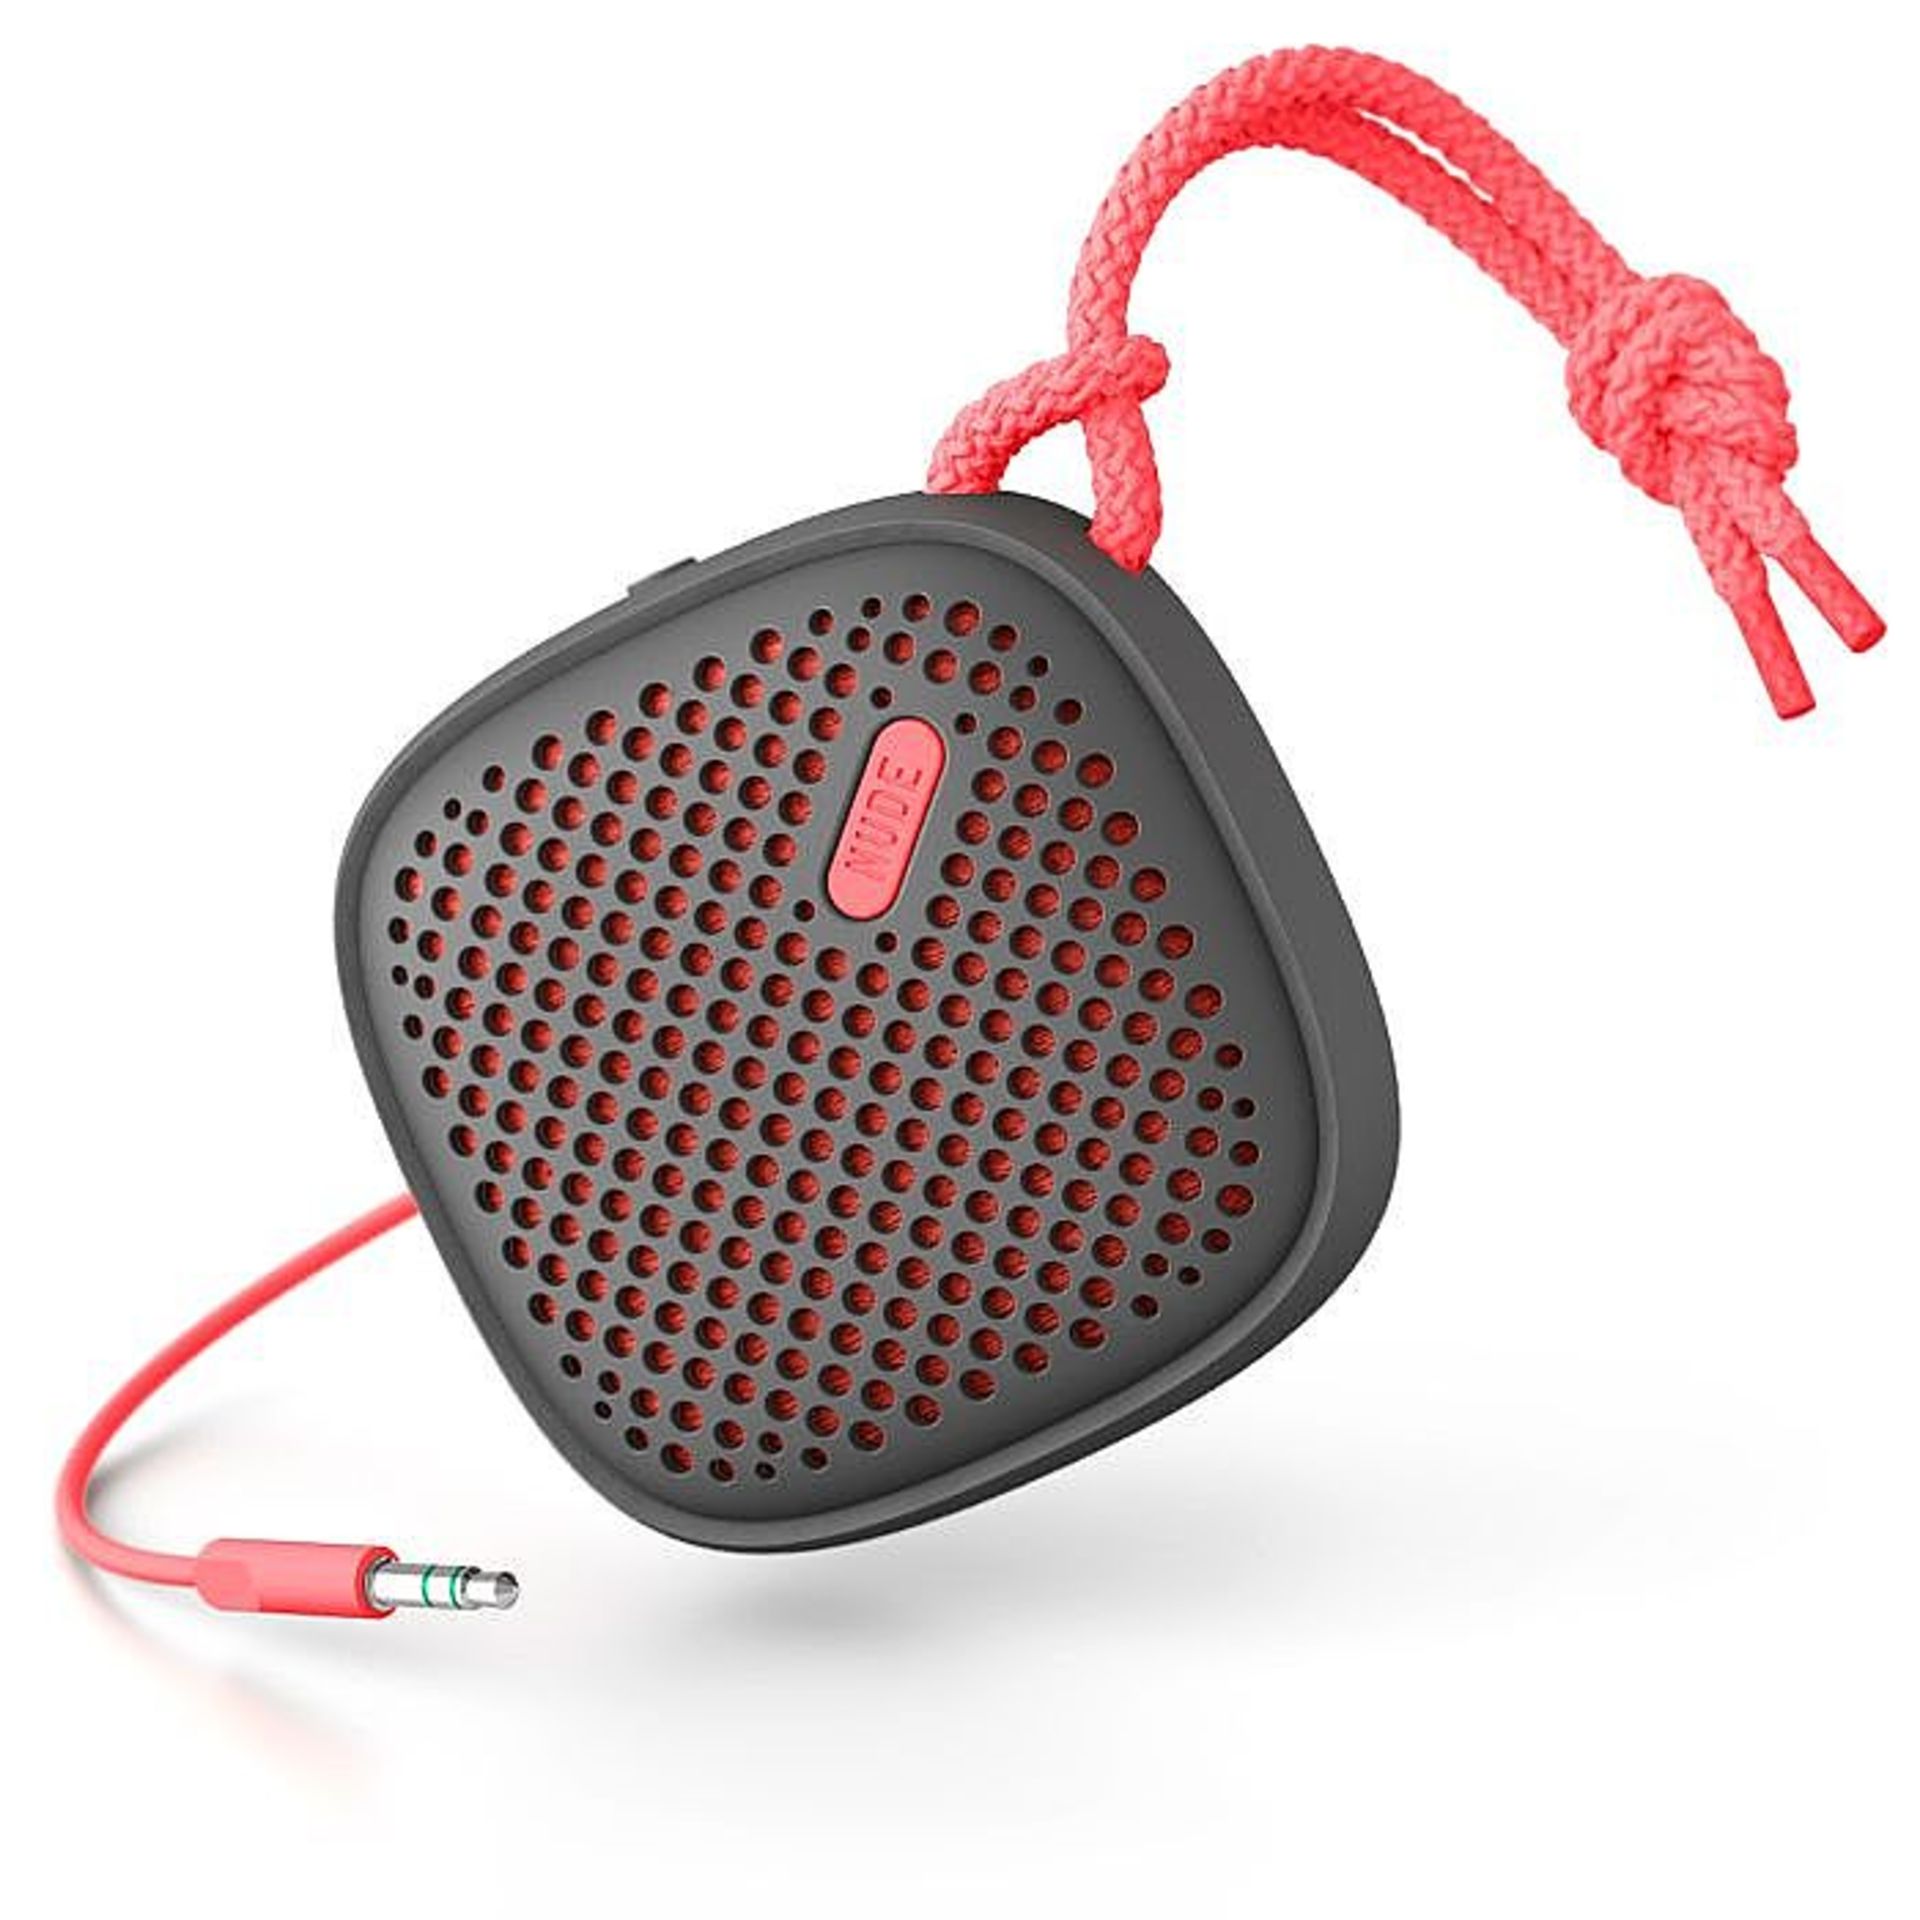 V *TRADE QTY* Brand New Nude Audio Move S Wired Portable Speaker - Coral X 12 YOUR BID PRICE TO BE